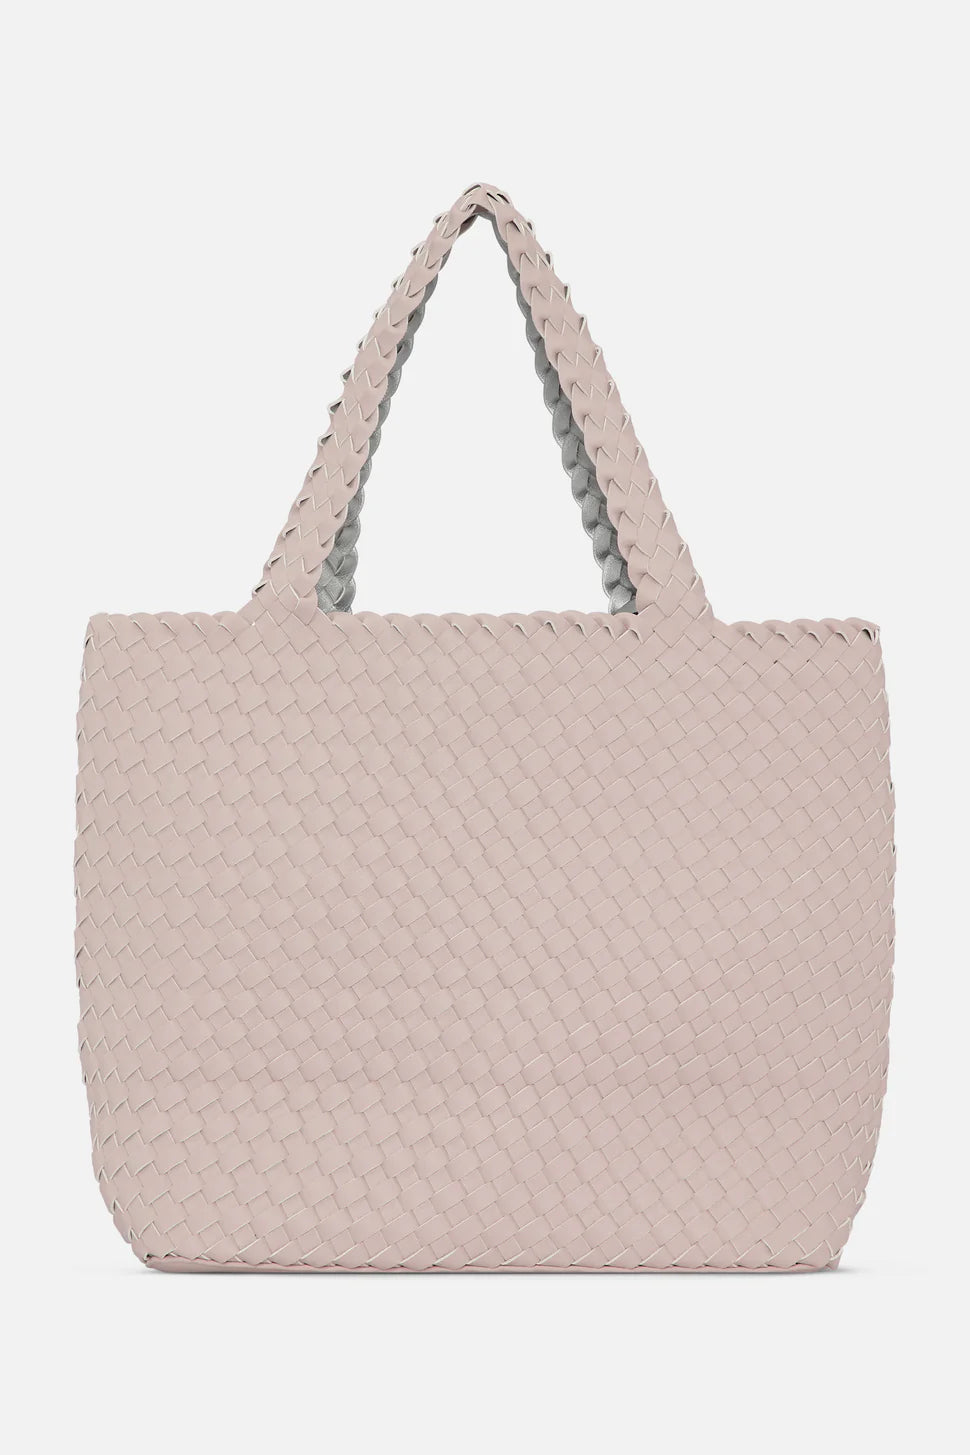 Ilse Jacobsen Tote Bag in Rose Silver